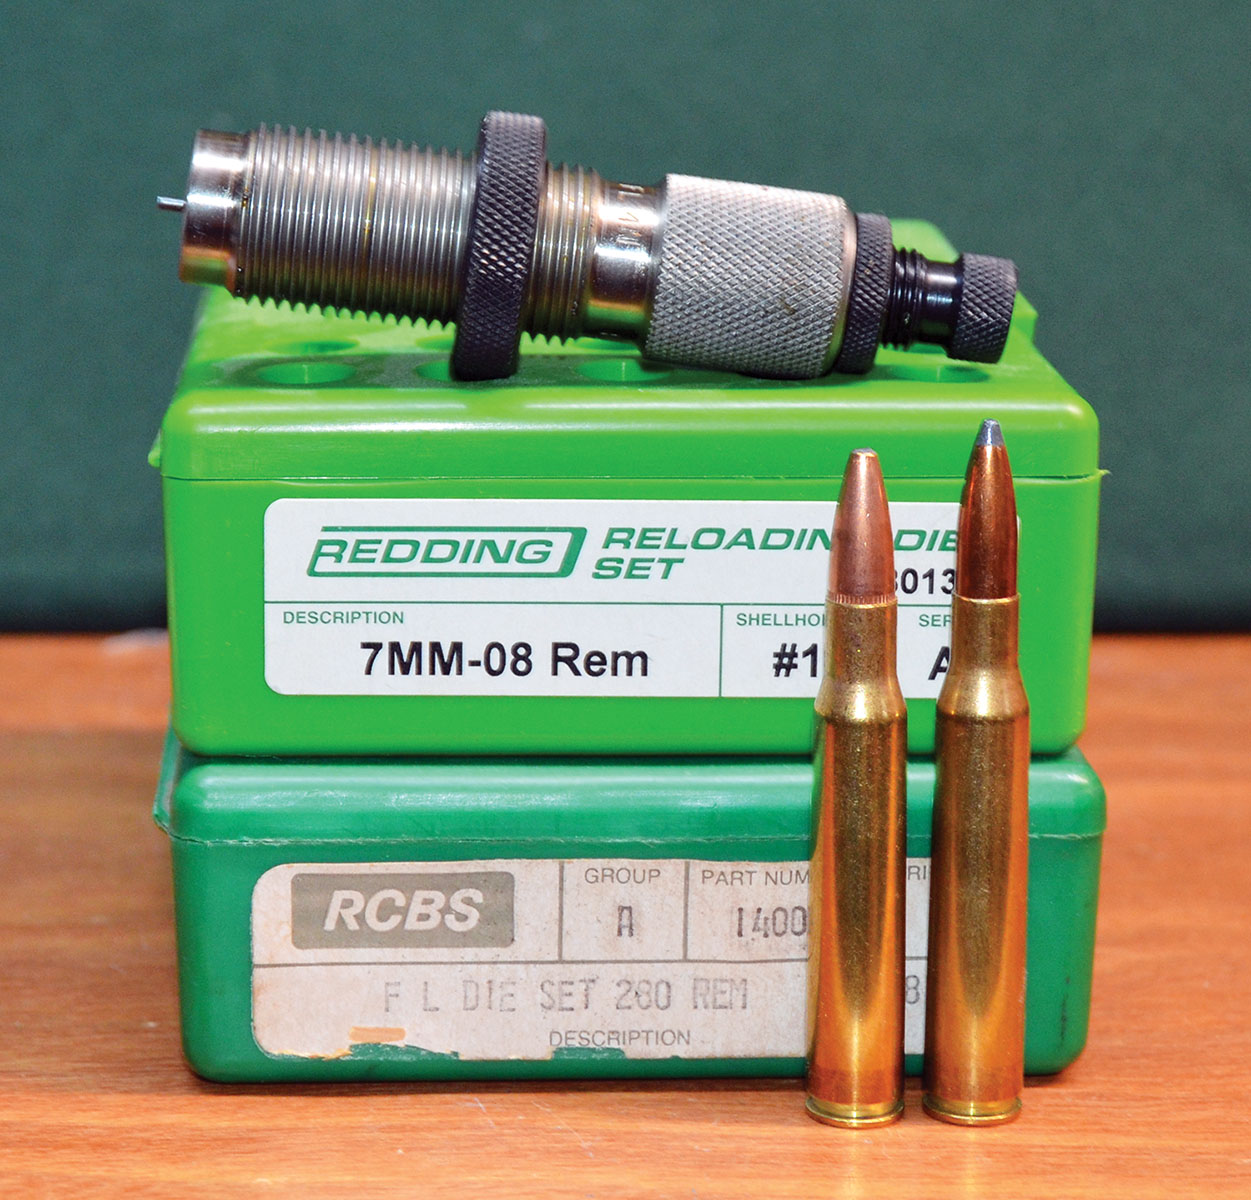 In the absence of reloading dies, the first ammunition was loaded for the rifle in 285 O.K.H. belonging to Layne’s friend, by necking down the 30-06 case with an RCBS full-length sizing die for the 280 Remington. A Redding full- lengthsizer was used to gradually push the shoulder back until the case was a snug fit in the chamber during bolt closure of the rifle. Bullets were seated with an RCBS 280 Remington die.